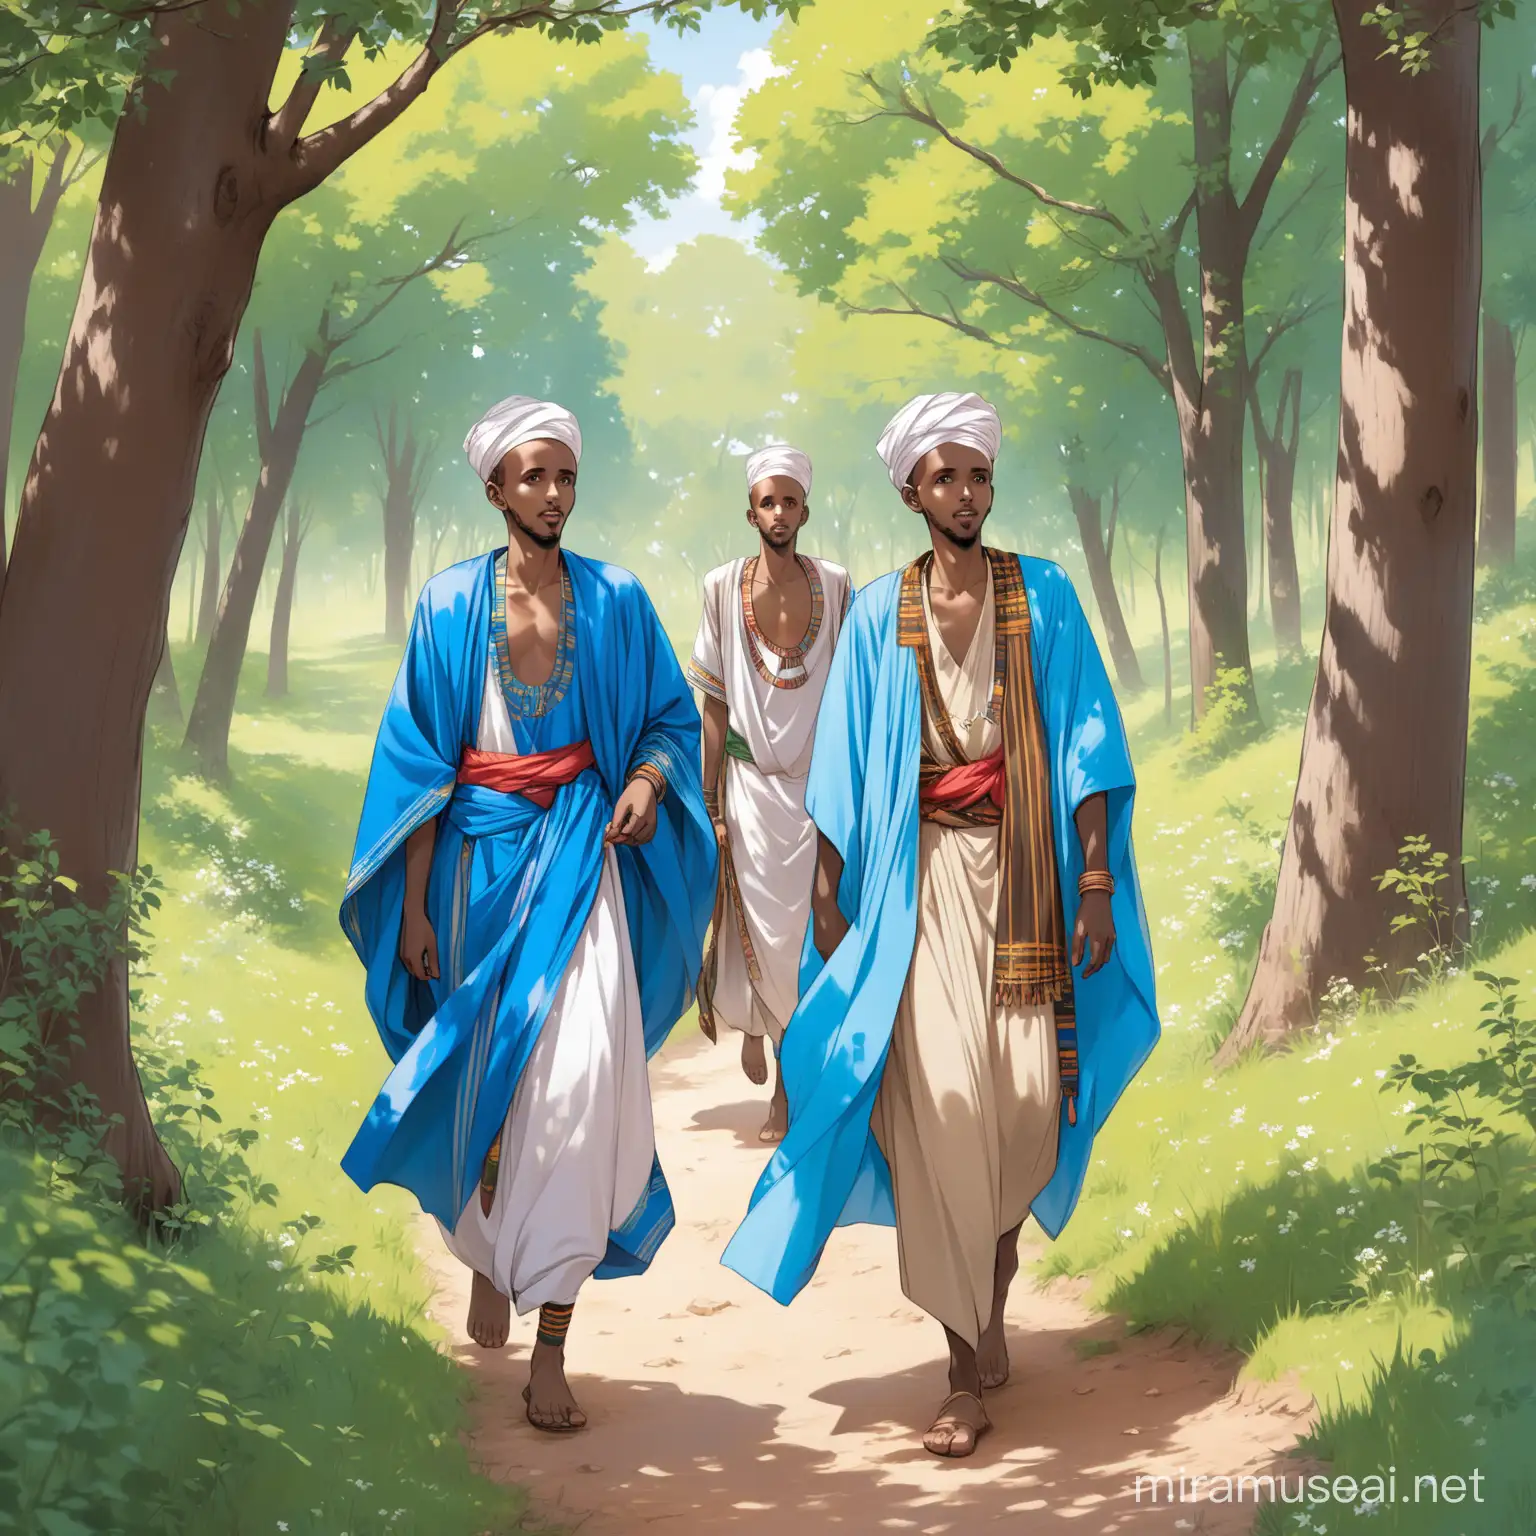 Two somali brothers walking in the woods wearing somali traditinal clothes, comels are grazing around them